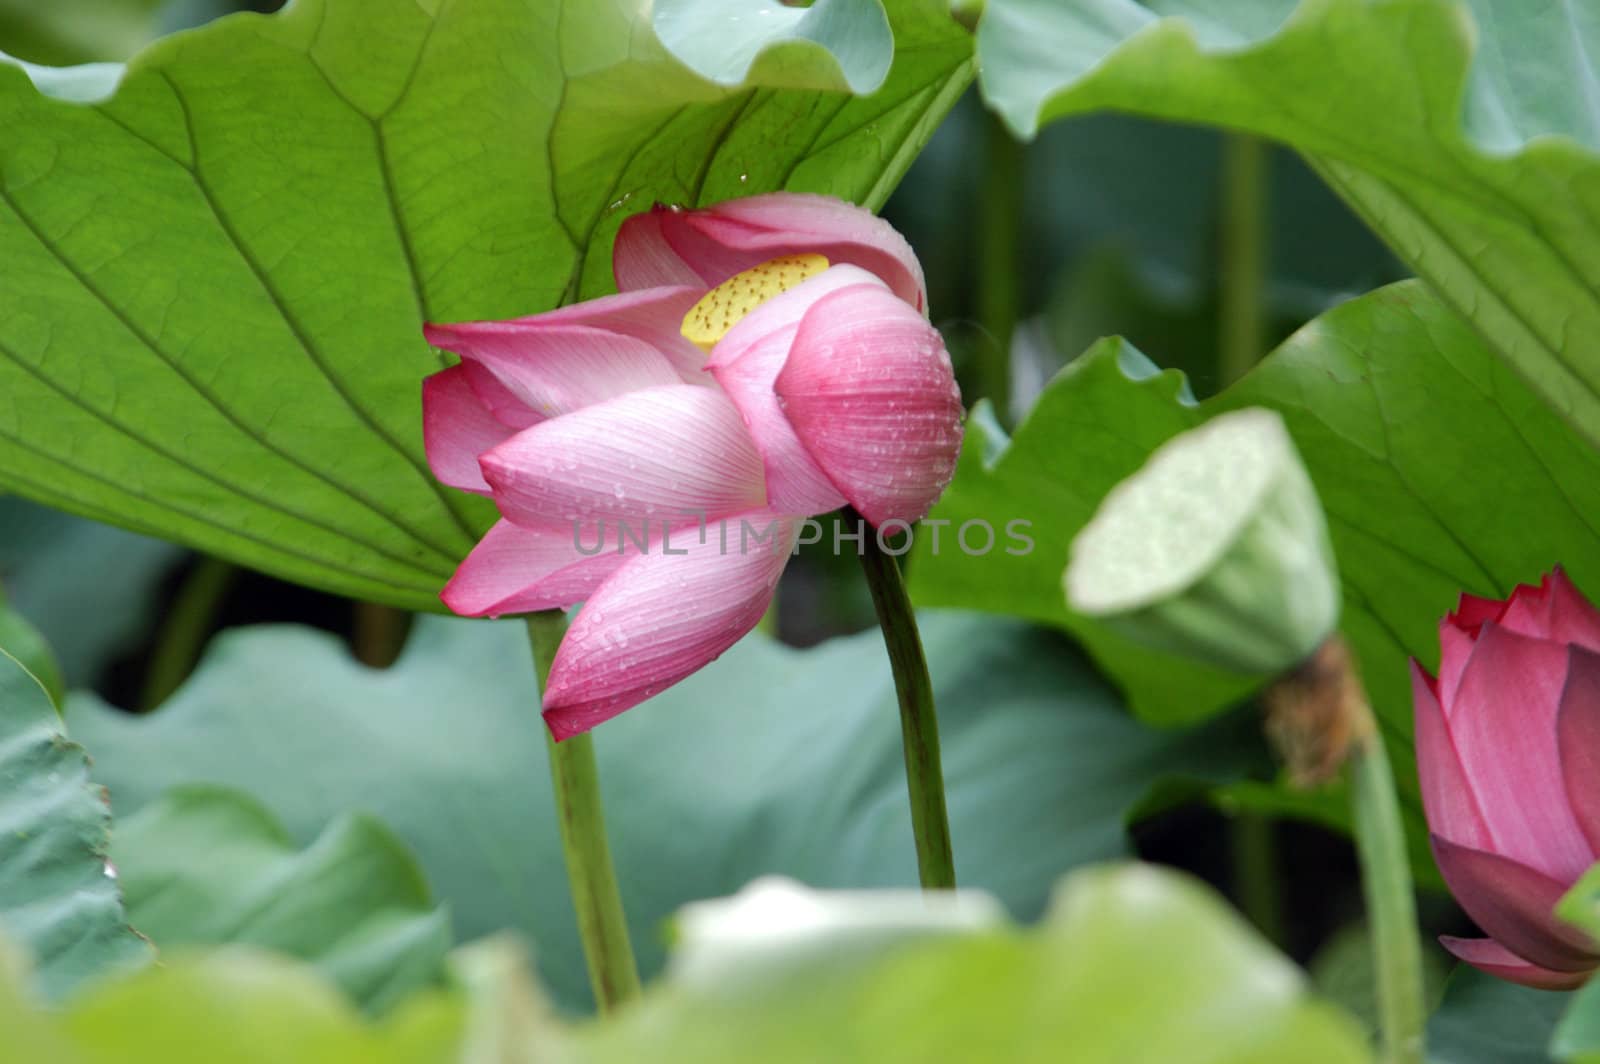 The growth of the lotus pond
